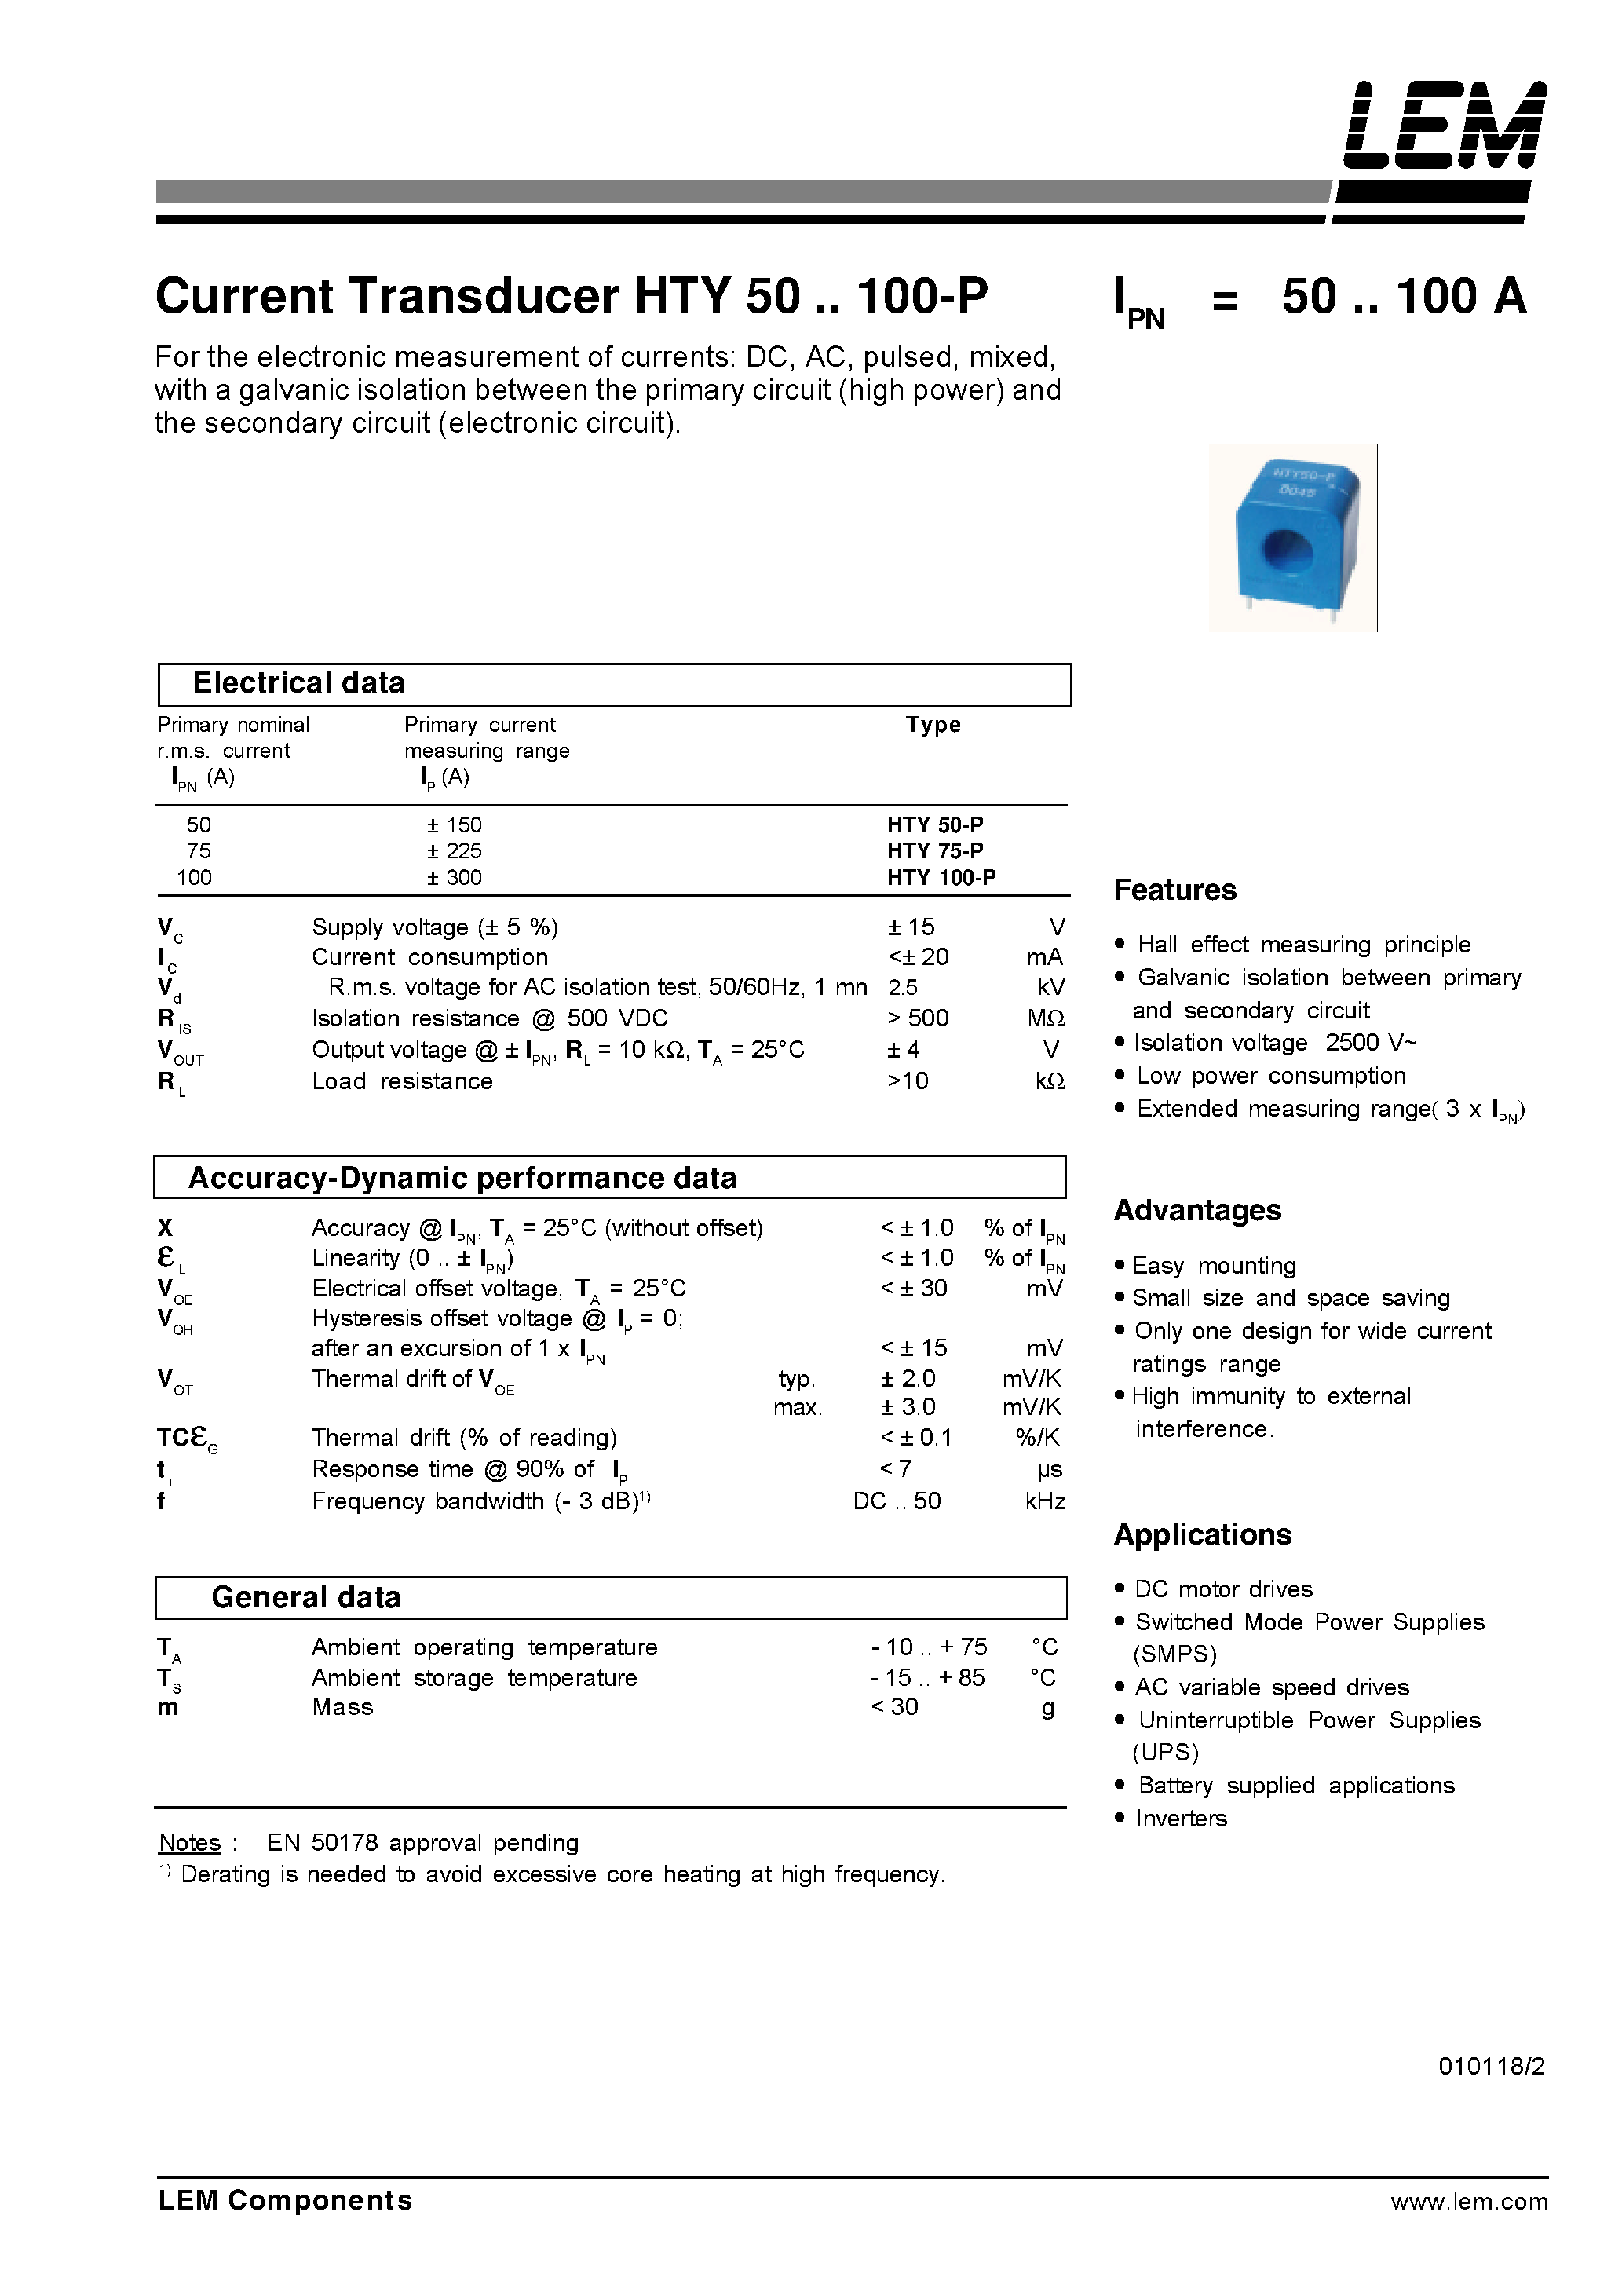 Datasheet HTY75-P - Current Transducer HTY 50~100-P page 1